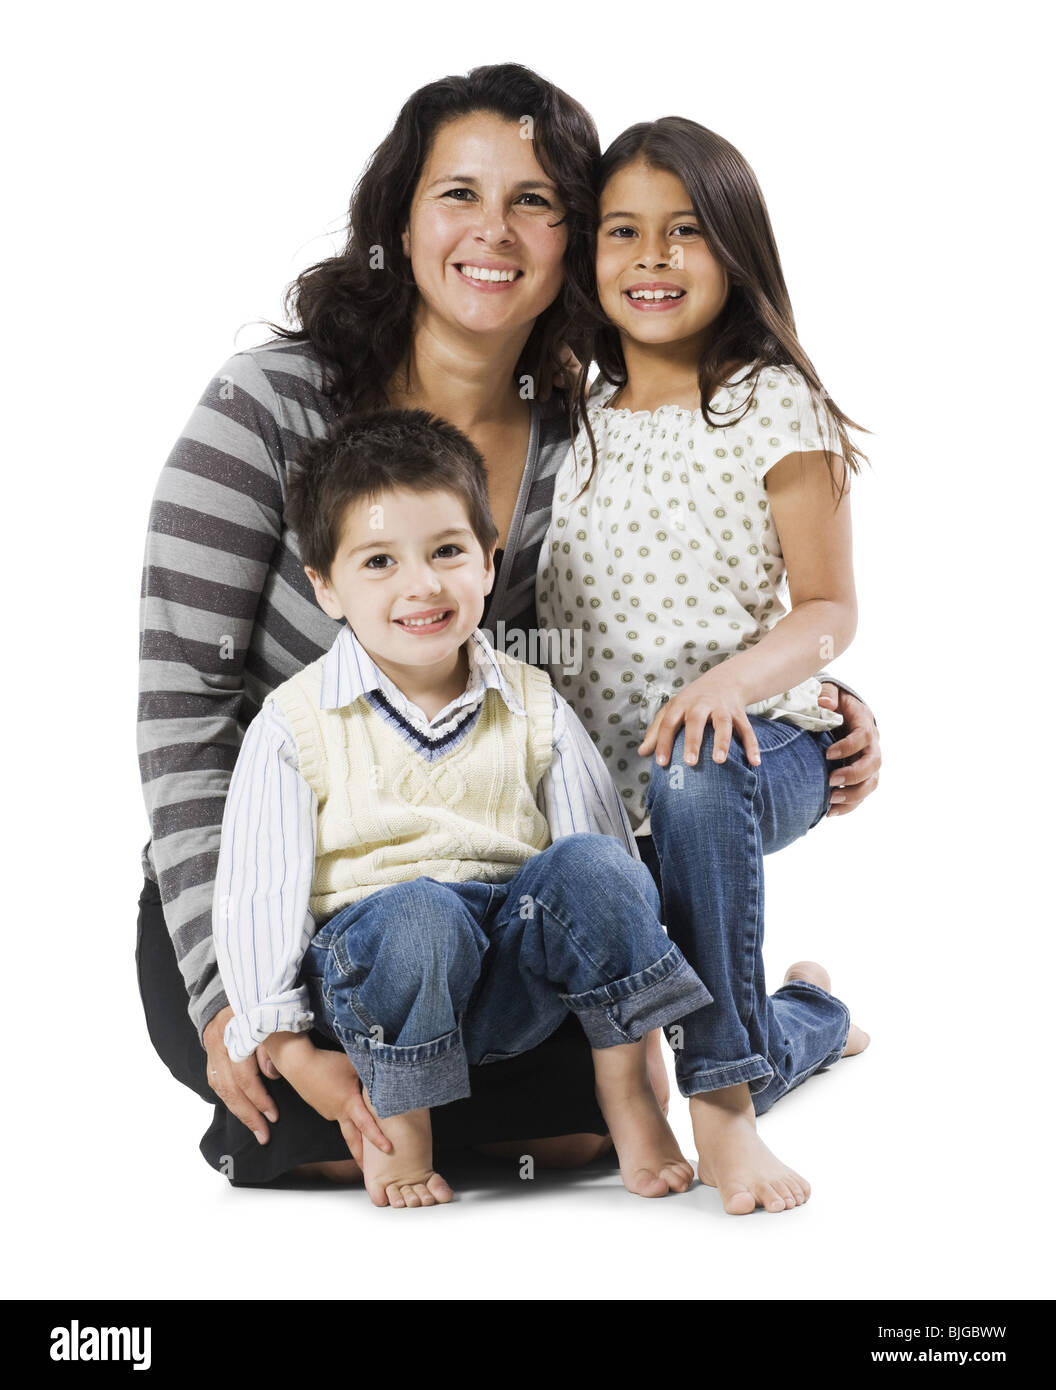 mother and two children Stock Photo